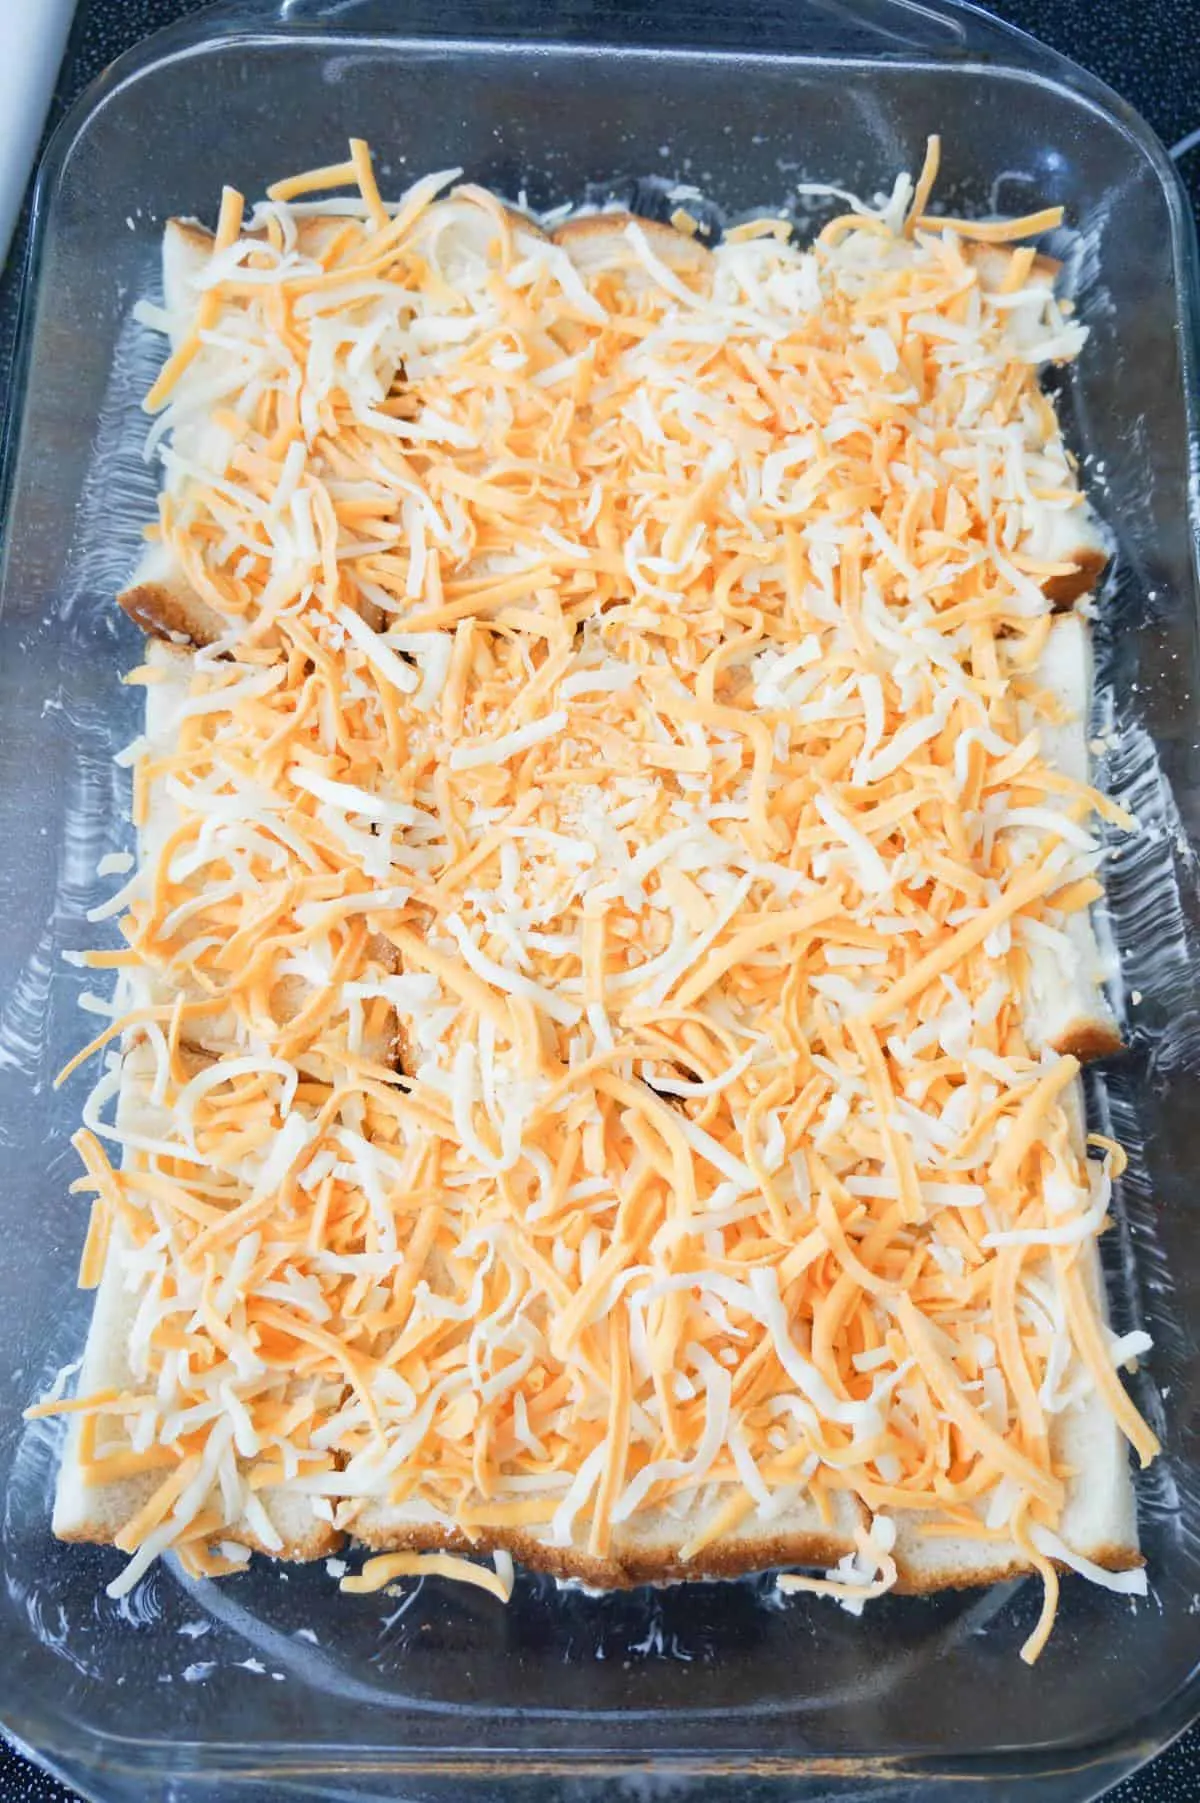 shredded mozzarella and cheddar cheese on top of bread slices in a baking dish